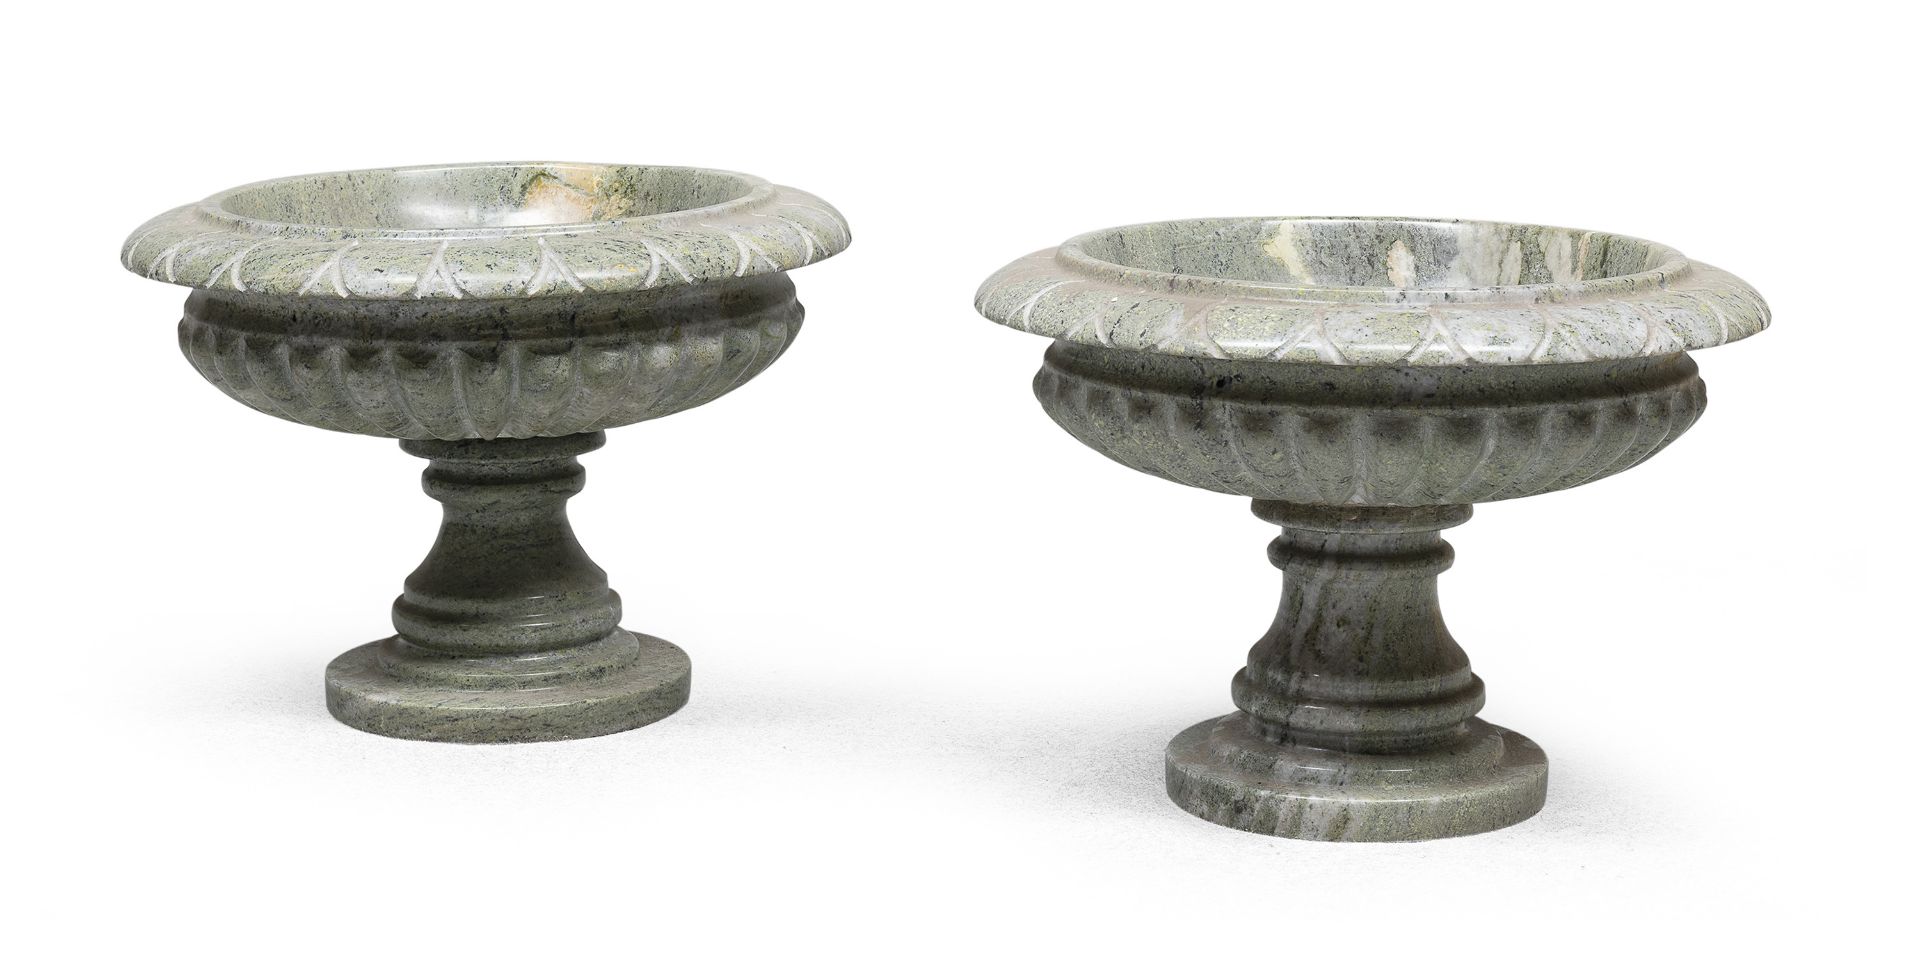 PAIR OF BASINS IN CIPOLLINO ALMOND MARBLE 20th CENTURY